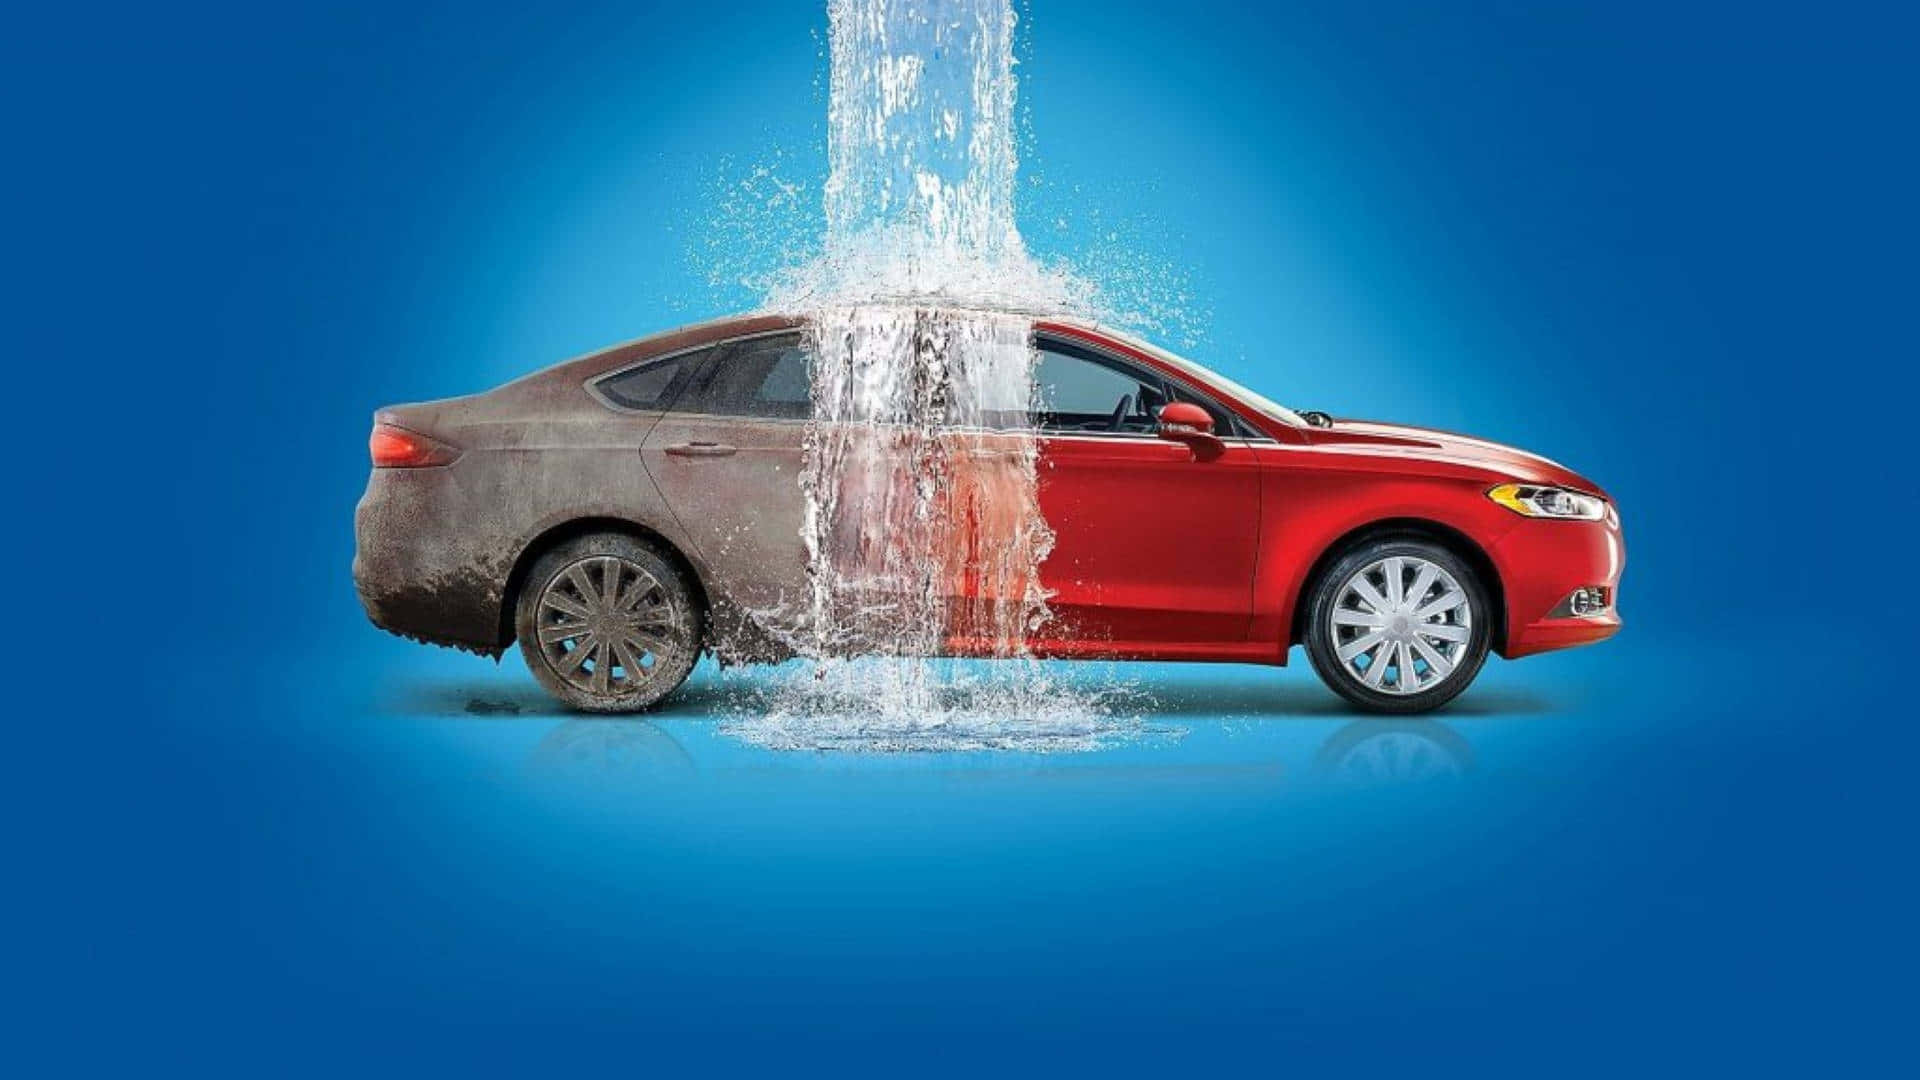 A Red Car Is Being Washed With Water